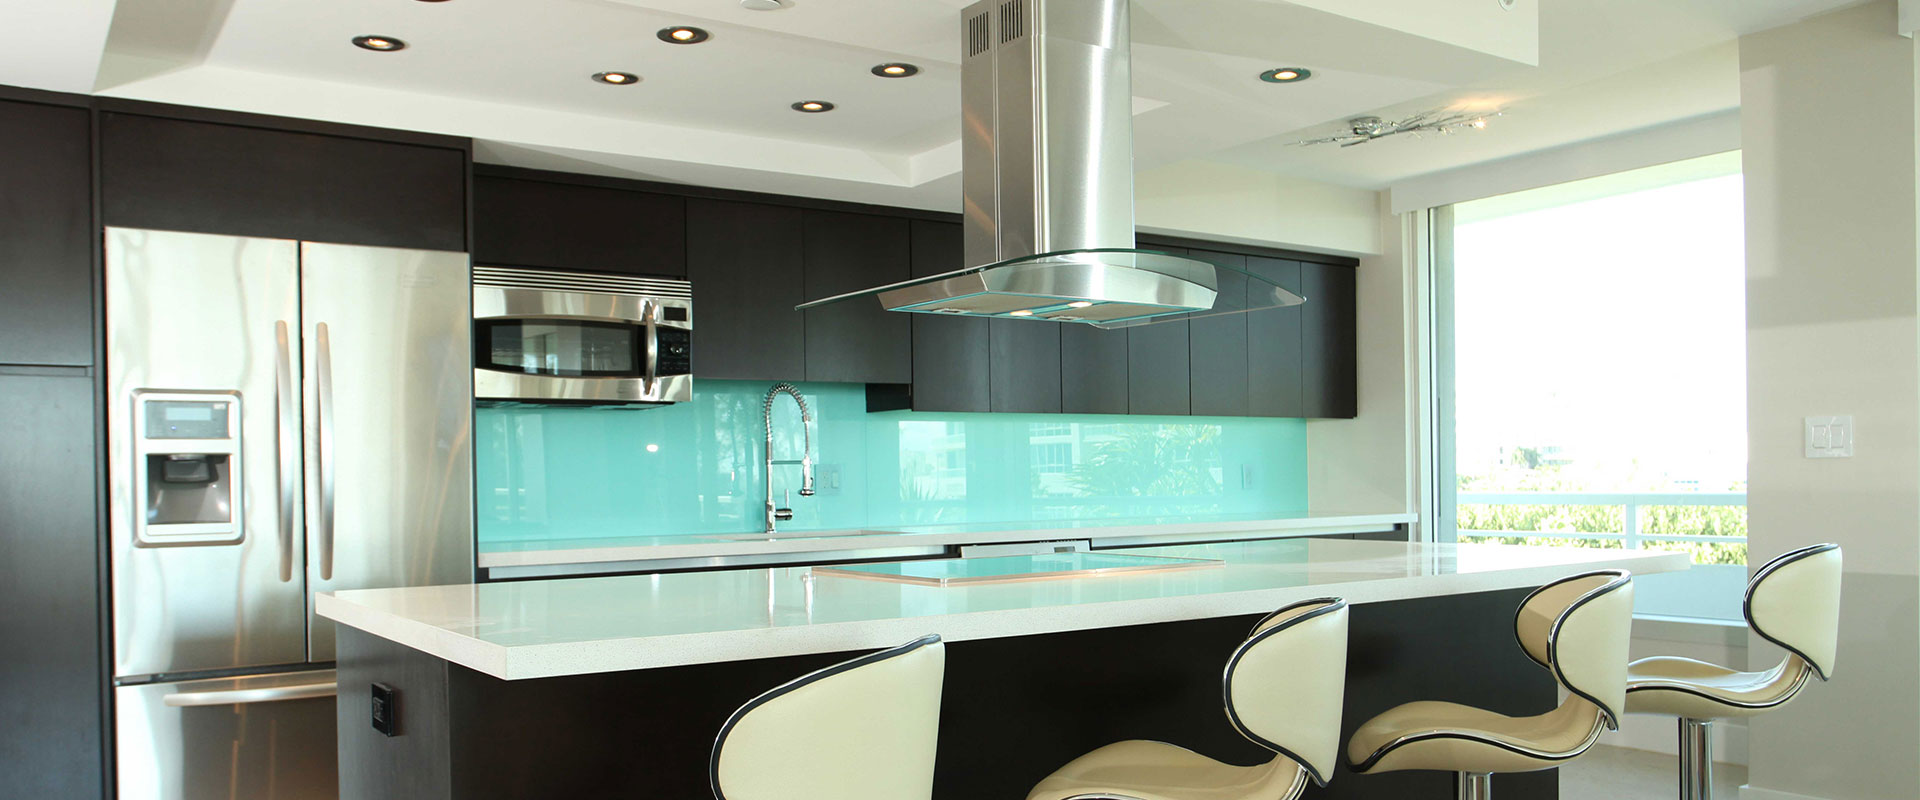 A modern kitchen with a a large center island. The back bench as a vibrant aquamarine coloured glass splashback